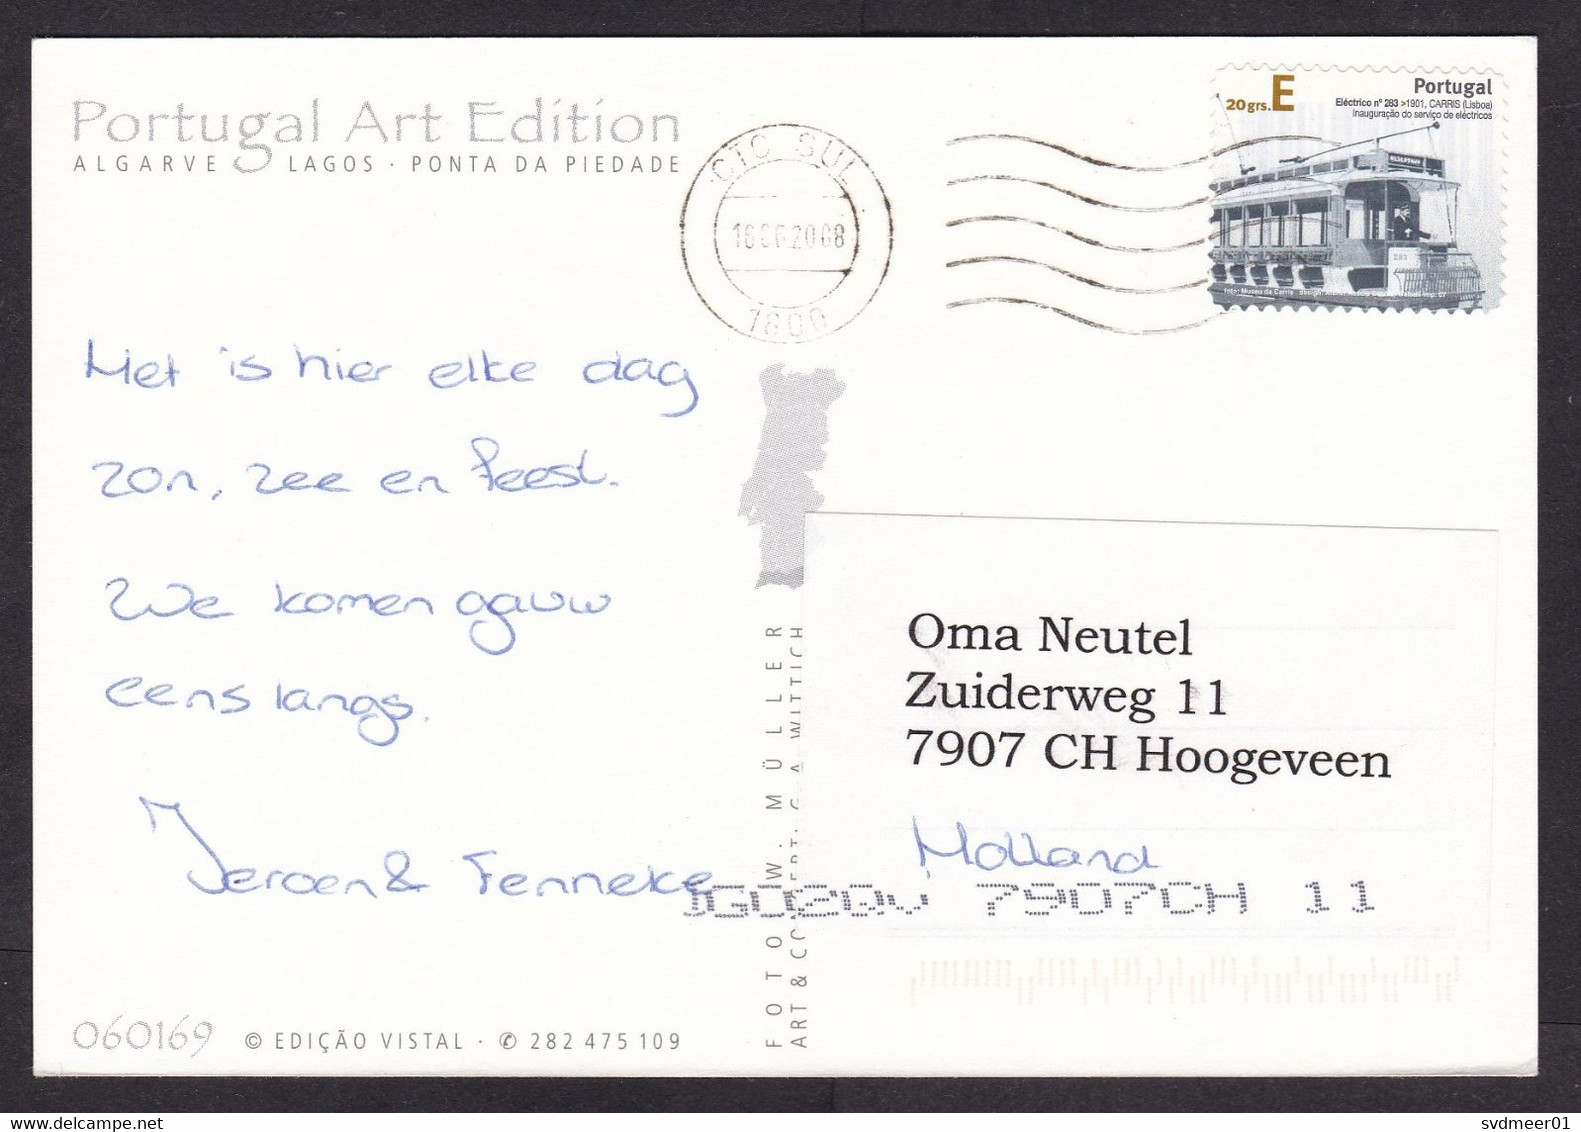 Portugal: Picture Postcard To Netherlands, 2008, 1 Stamp, Tram Trolley Car, Public Transport, E Rate (traces Of Use) - Covers & Documents